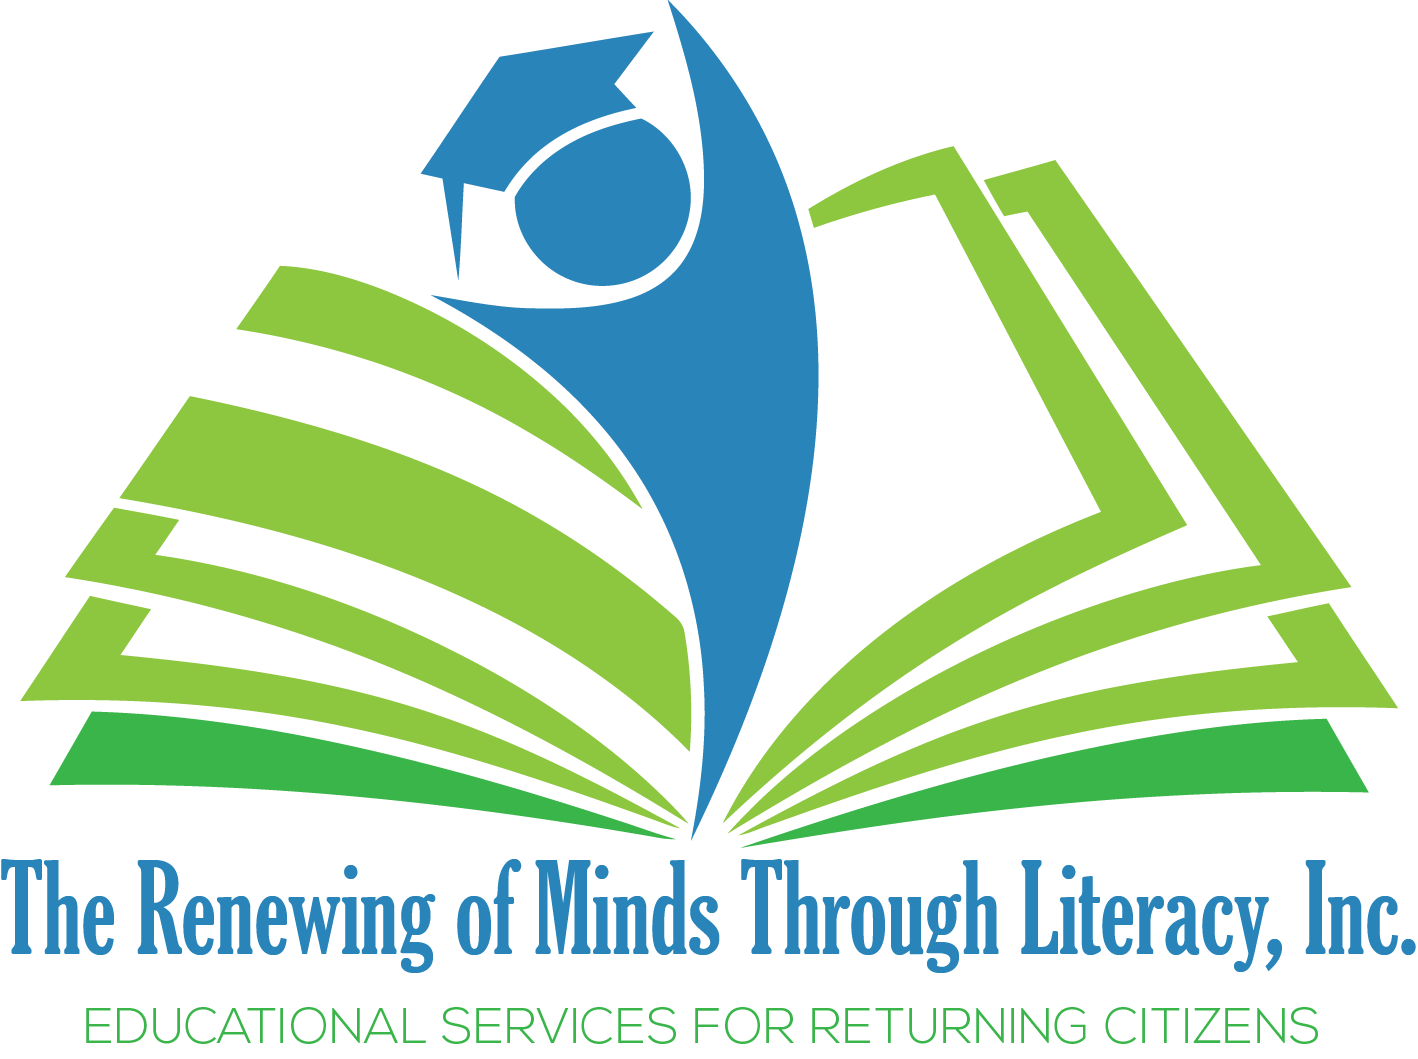 The Renewing of Minds Through Literacy, Inc.